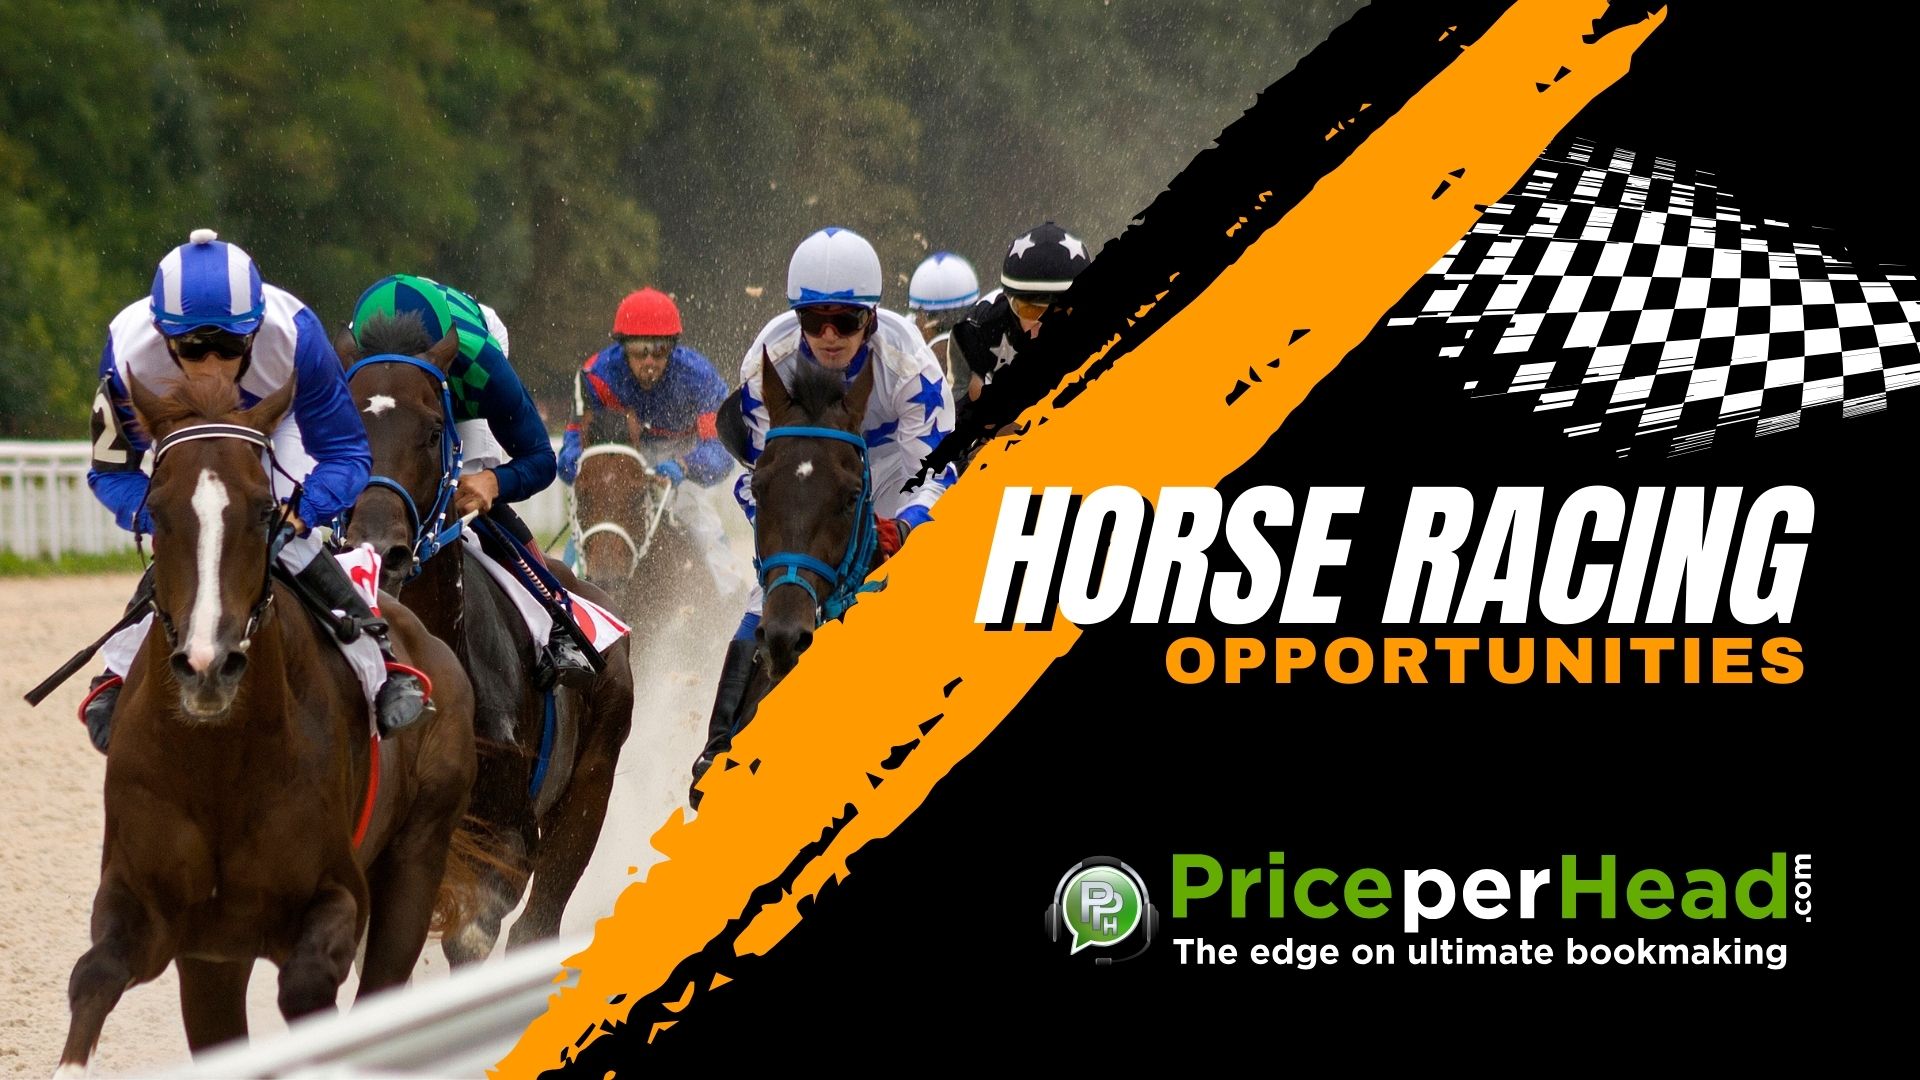 horse racing opportunities, pay per head, price per head